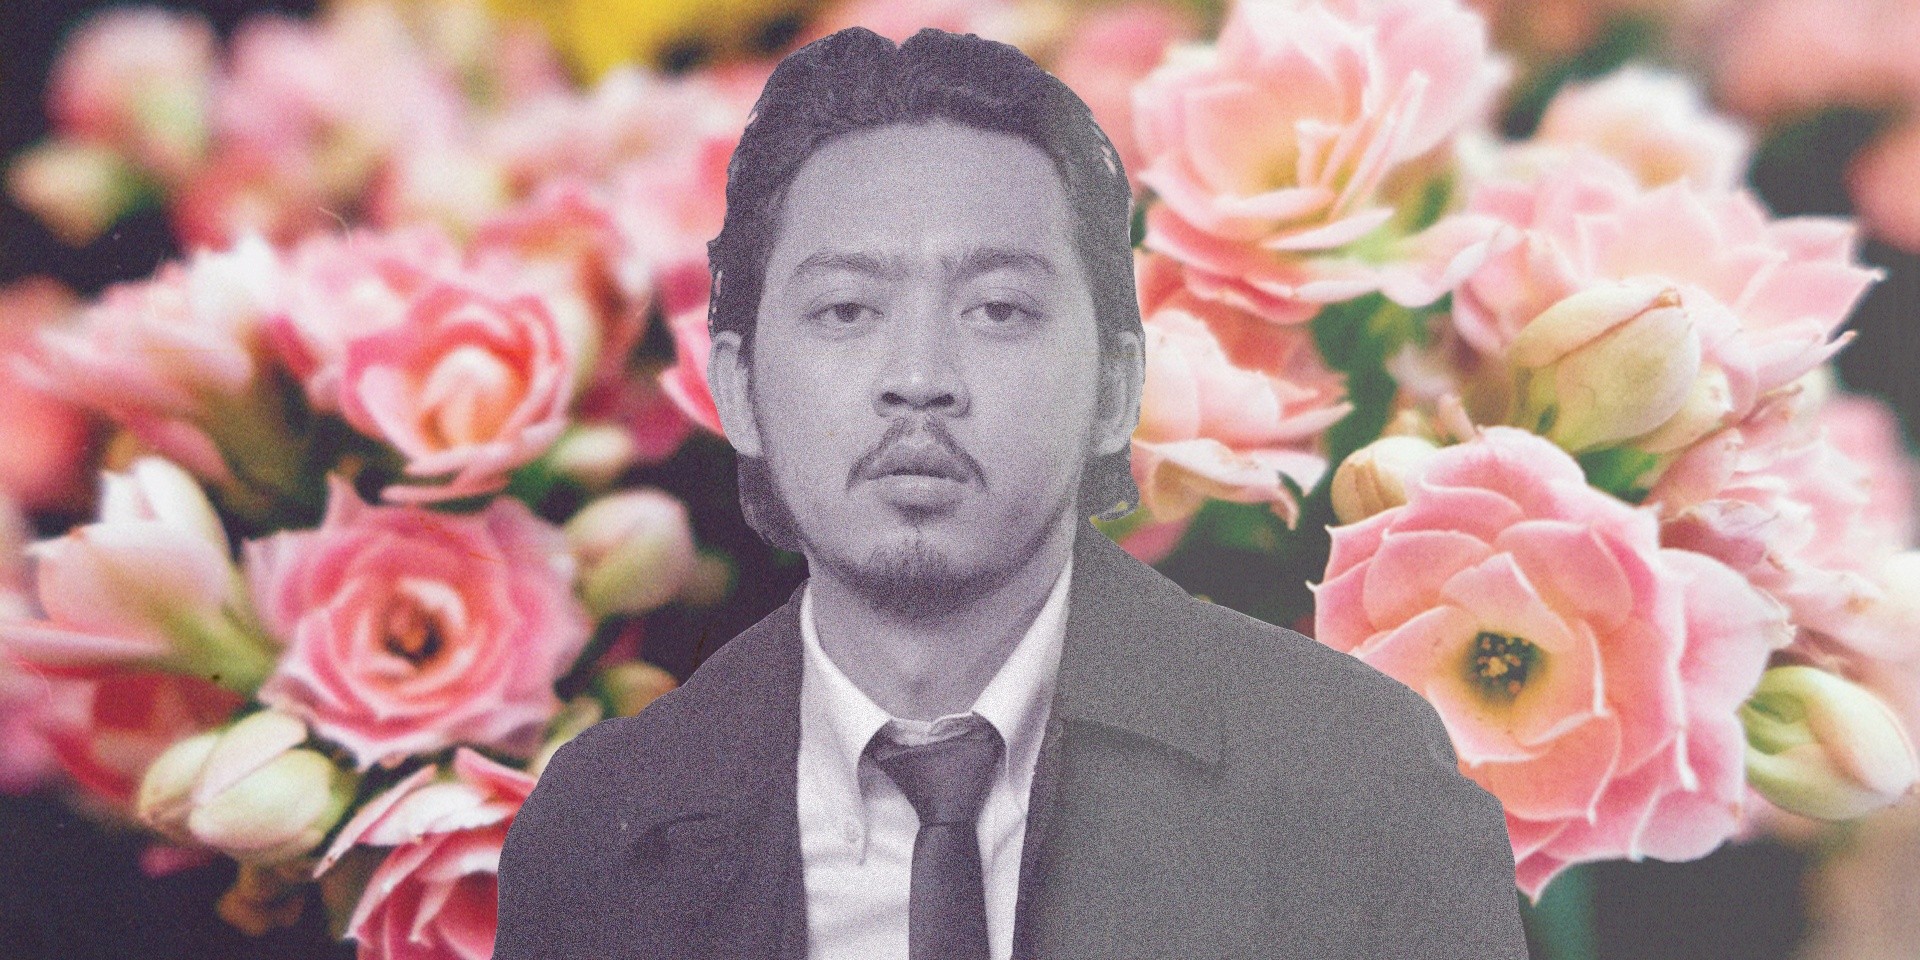 Pamungkas talks new single 'Birdy', upcoming album, and playing live shows in 2022